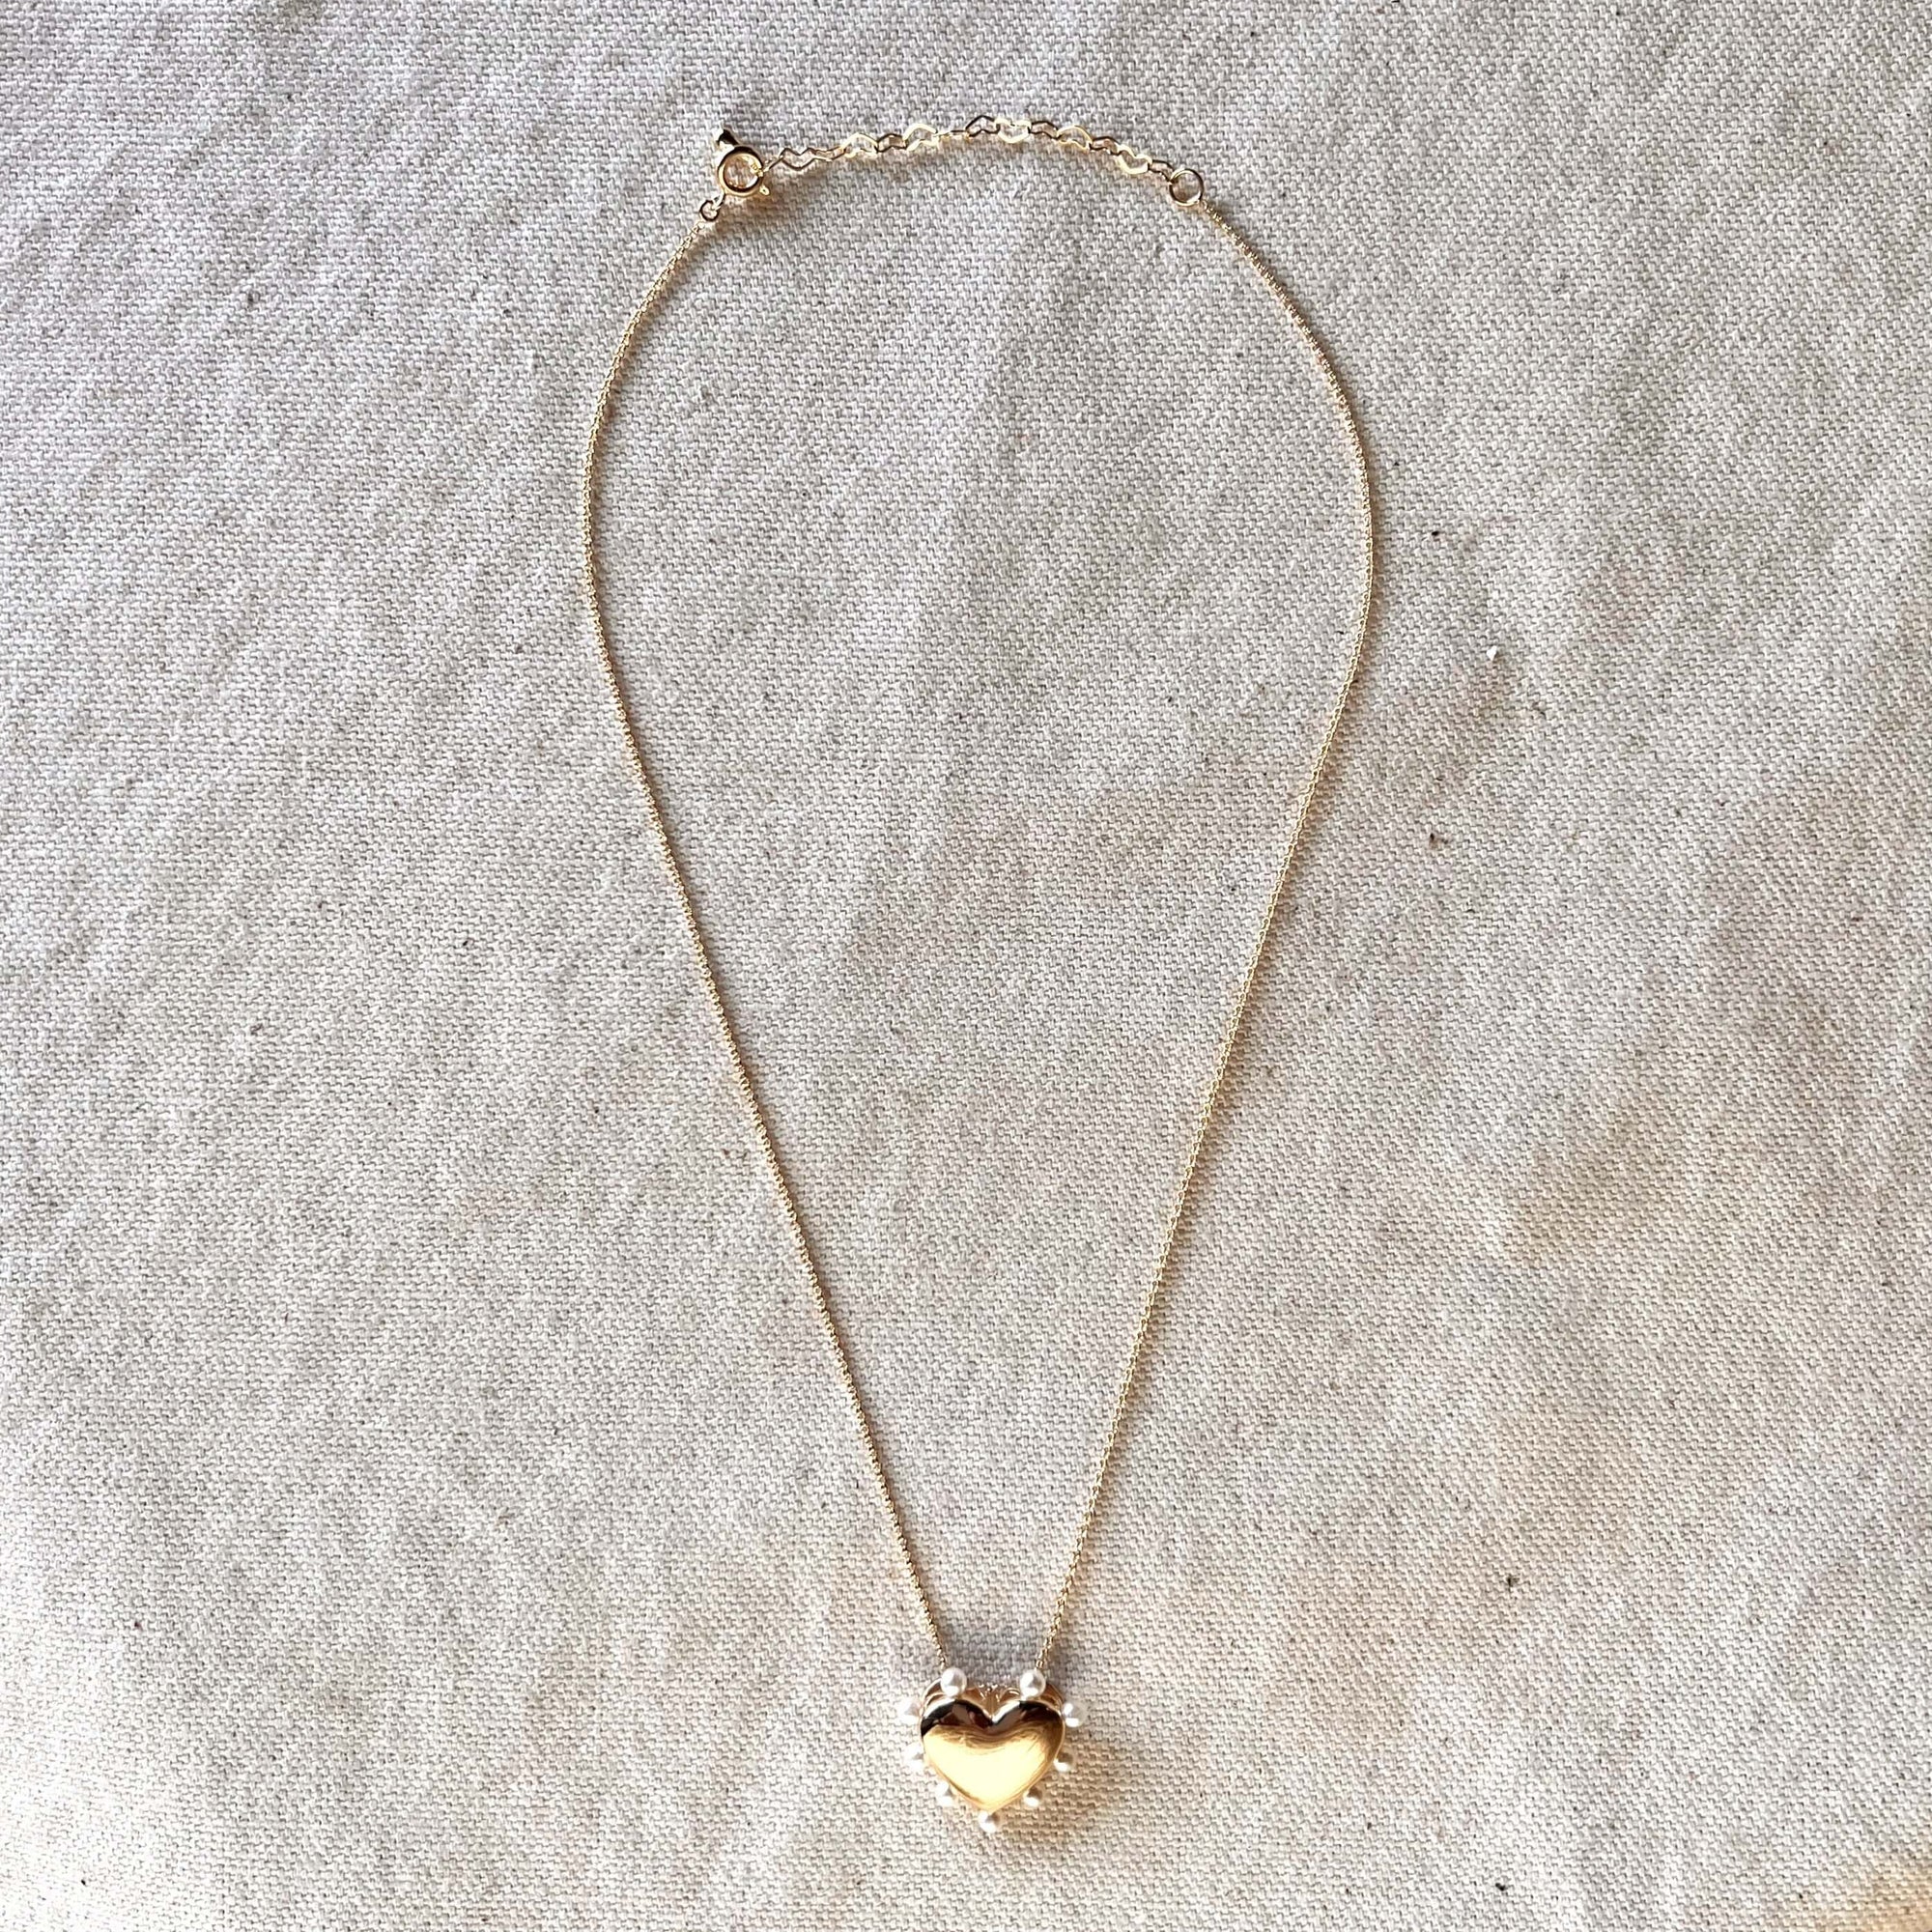 Puffy Heart Necklace in Gold and Pearl